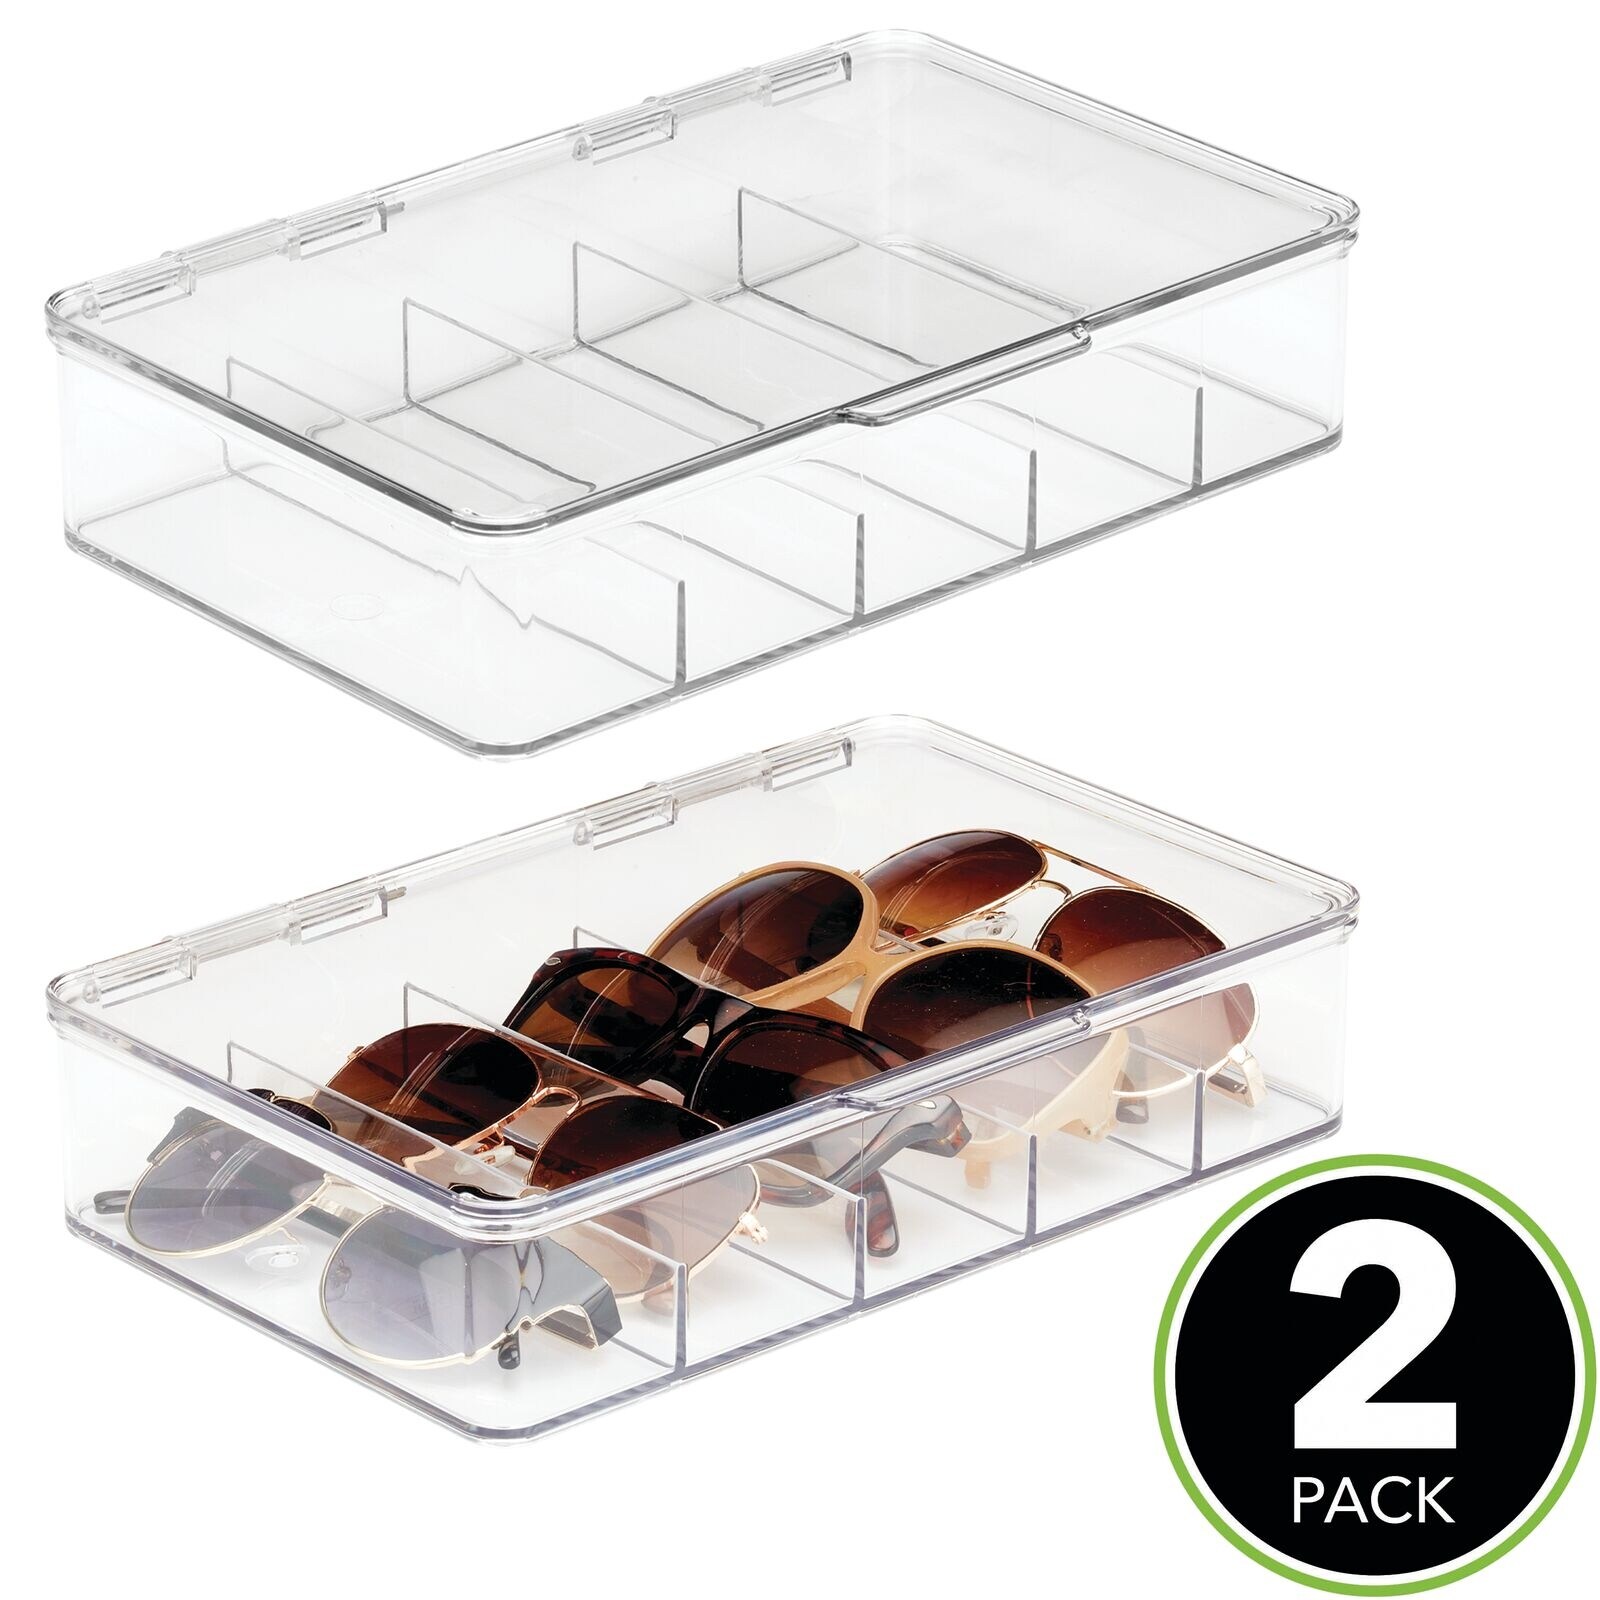 https://ak1.ostkcdn.com/images/products/is/images/direct/f136a6f0936896f28fe0756d38692c0c1826eff3/mDesign-Plastic-Stackable-Eyeglass-Storage-Organizer%2C-5-Sections%2C-2-Pack---Clear.jpg